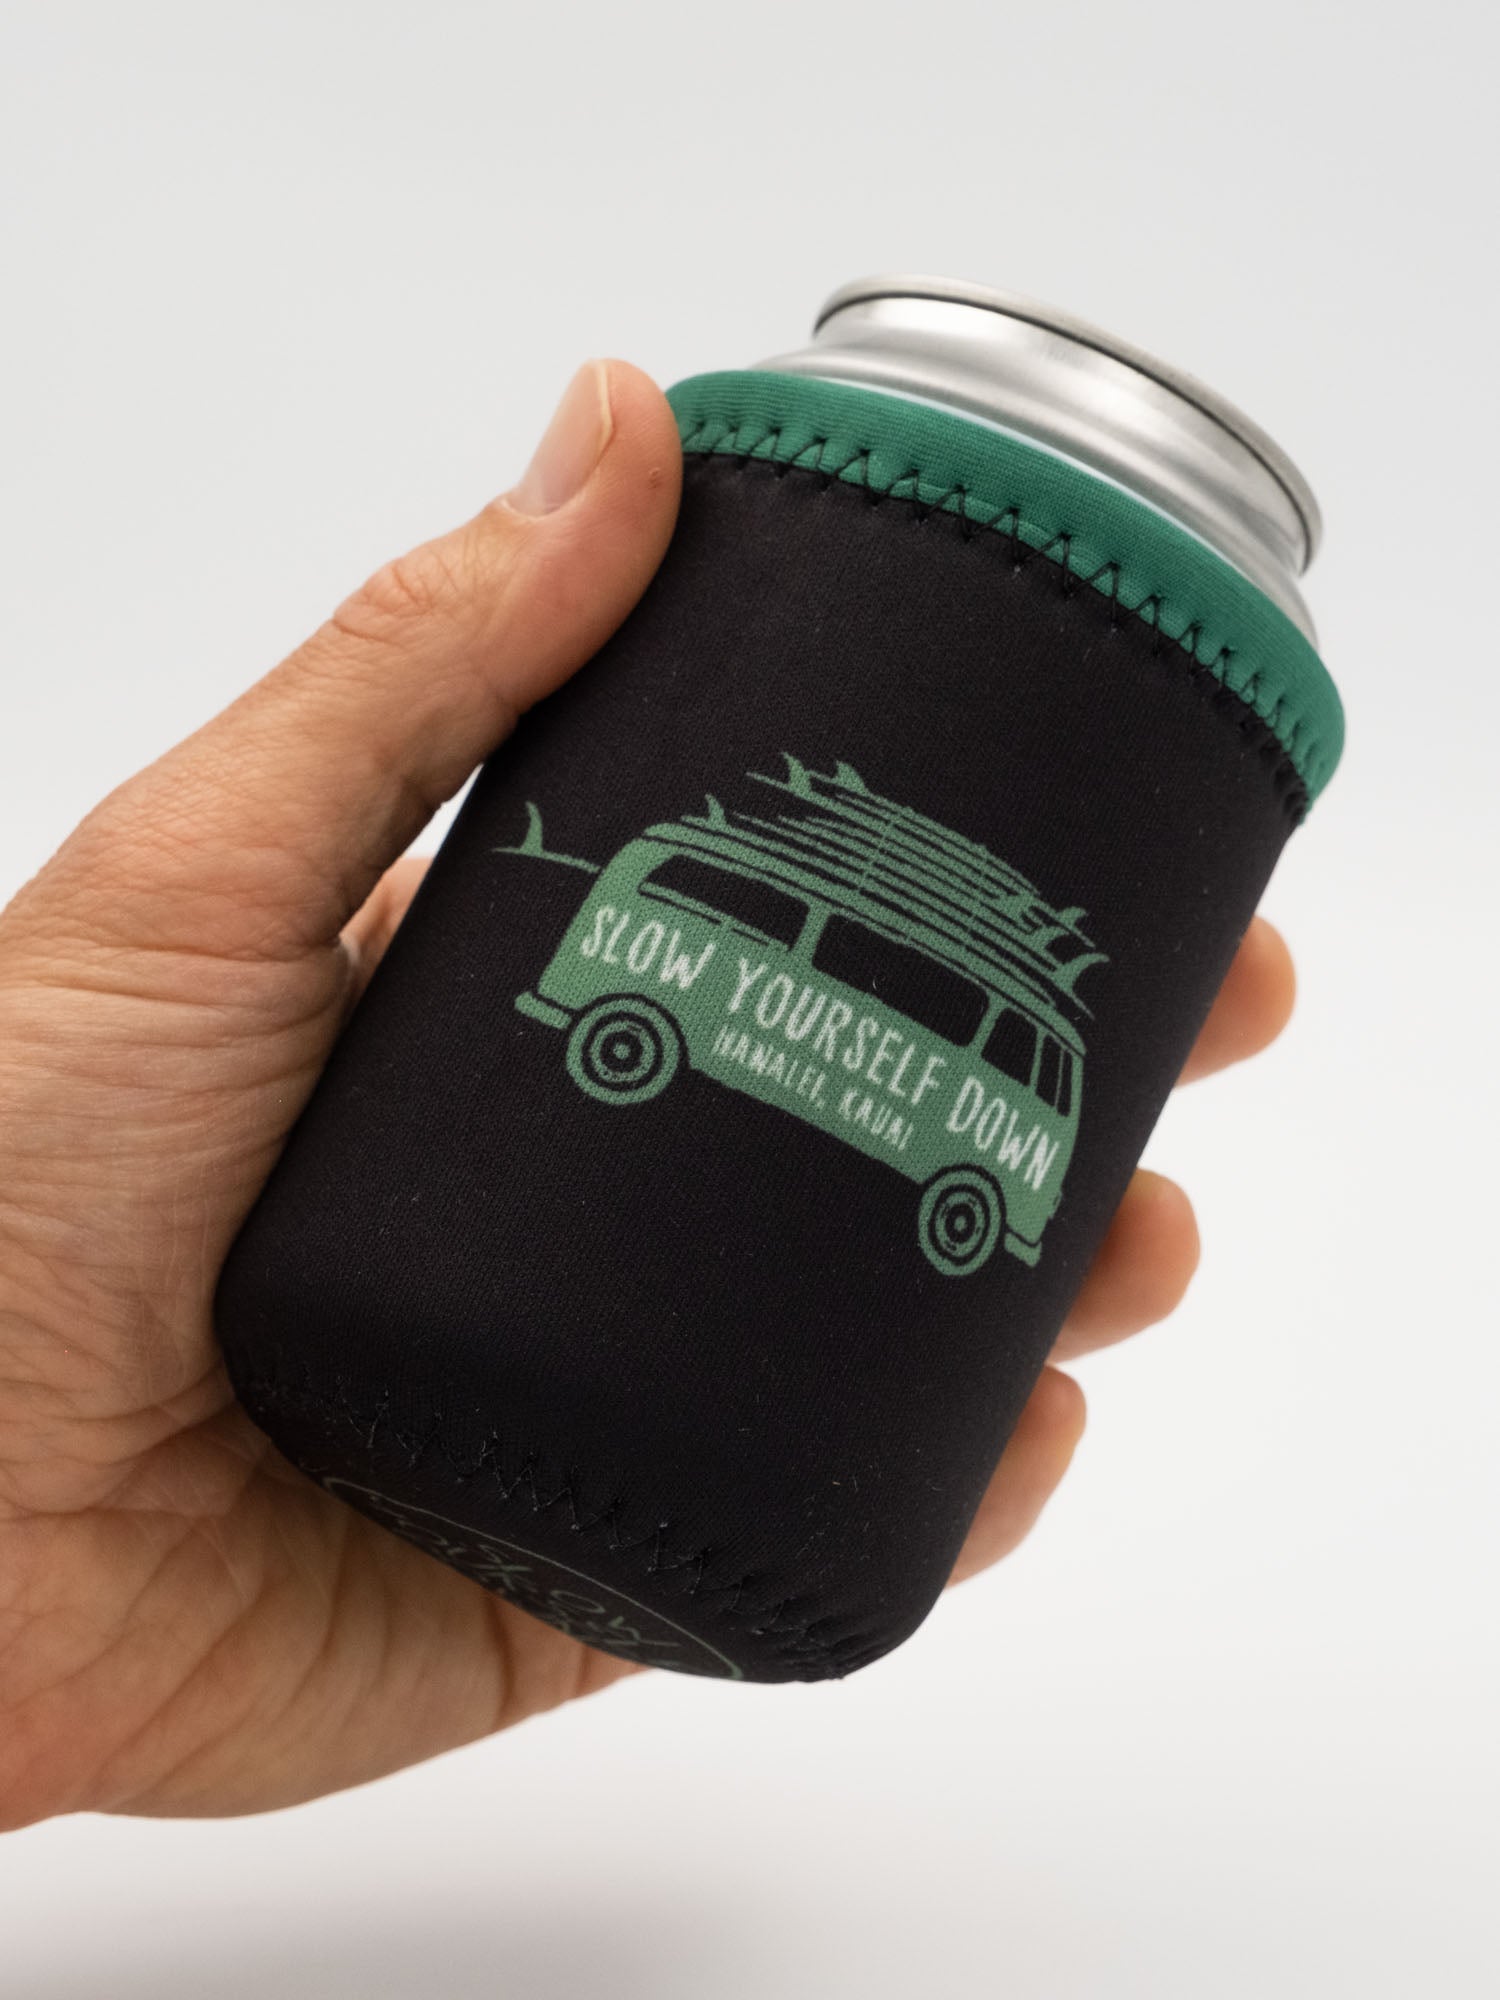 Van Life Coozie Coozie - Slow Yourself Down